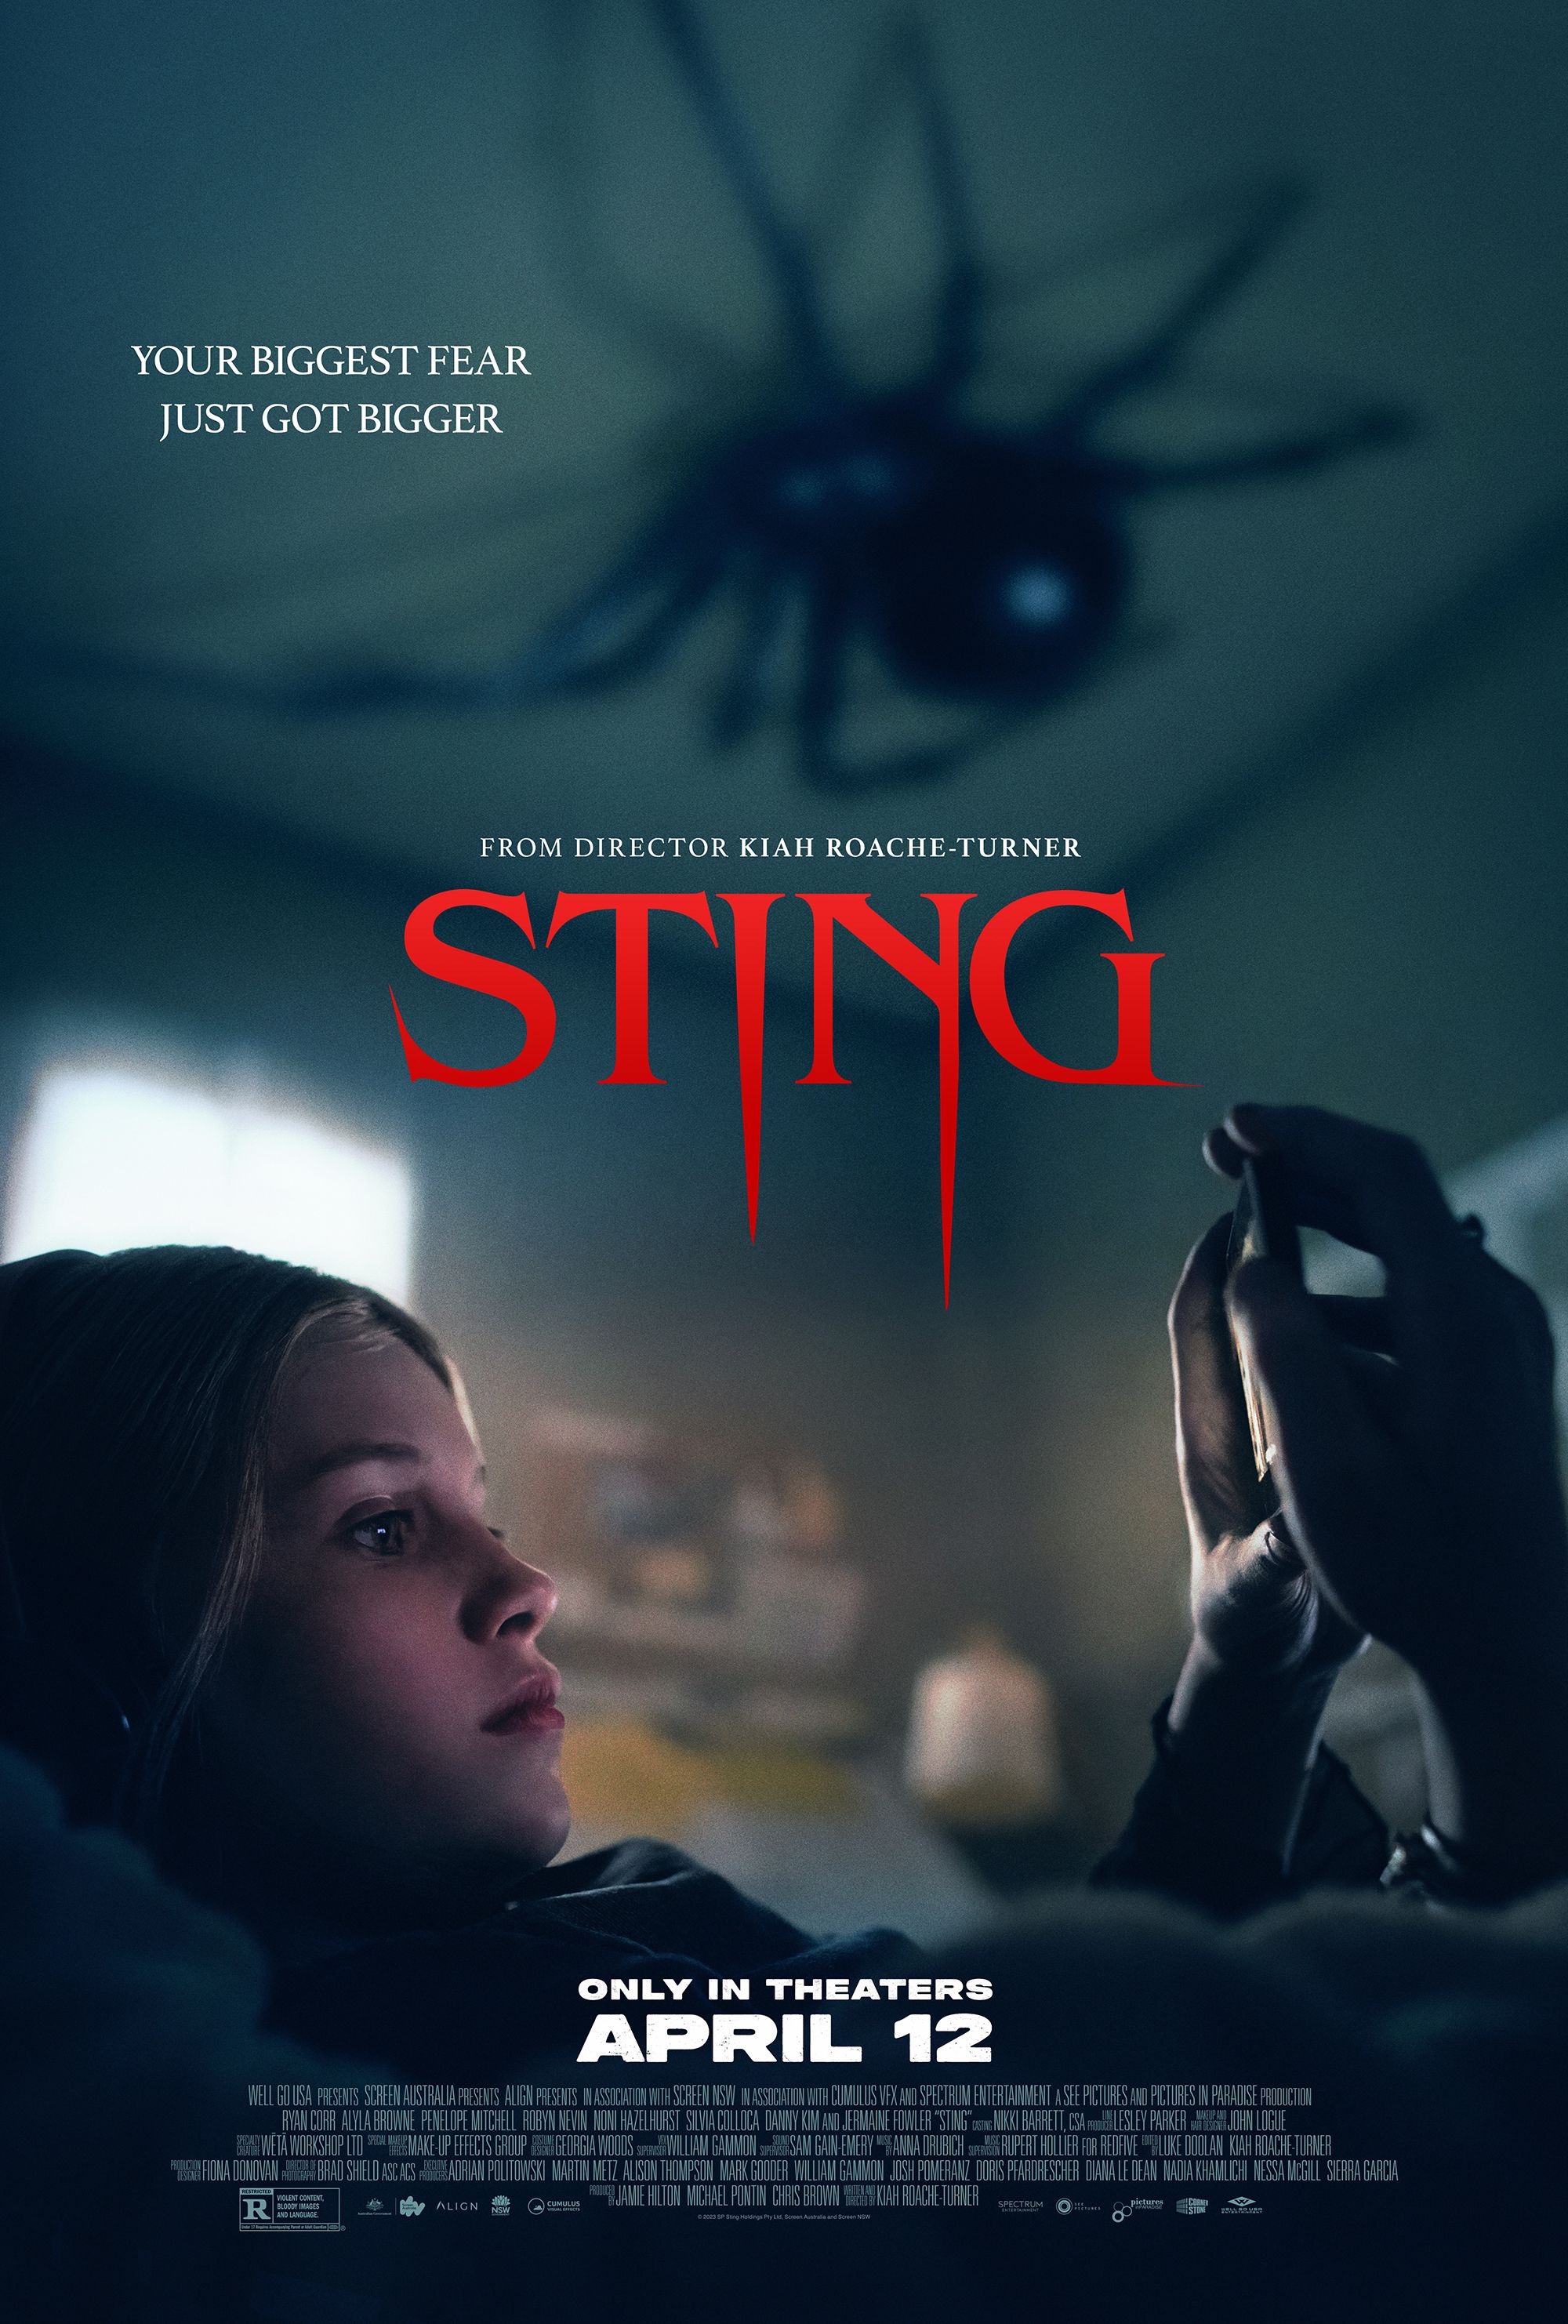 Sting Trailer Aims To Trigger Your Arachnophobia With A Huge Spider